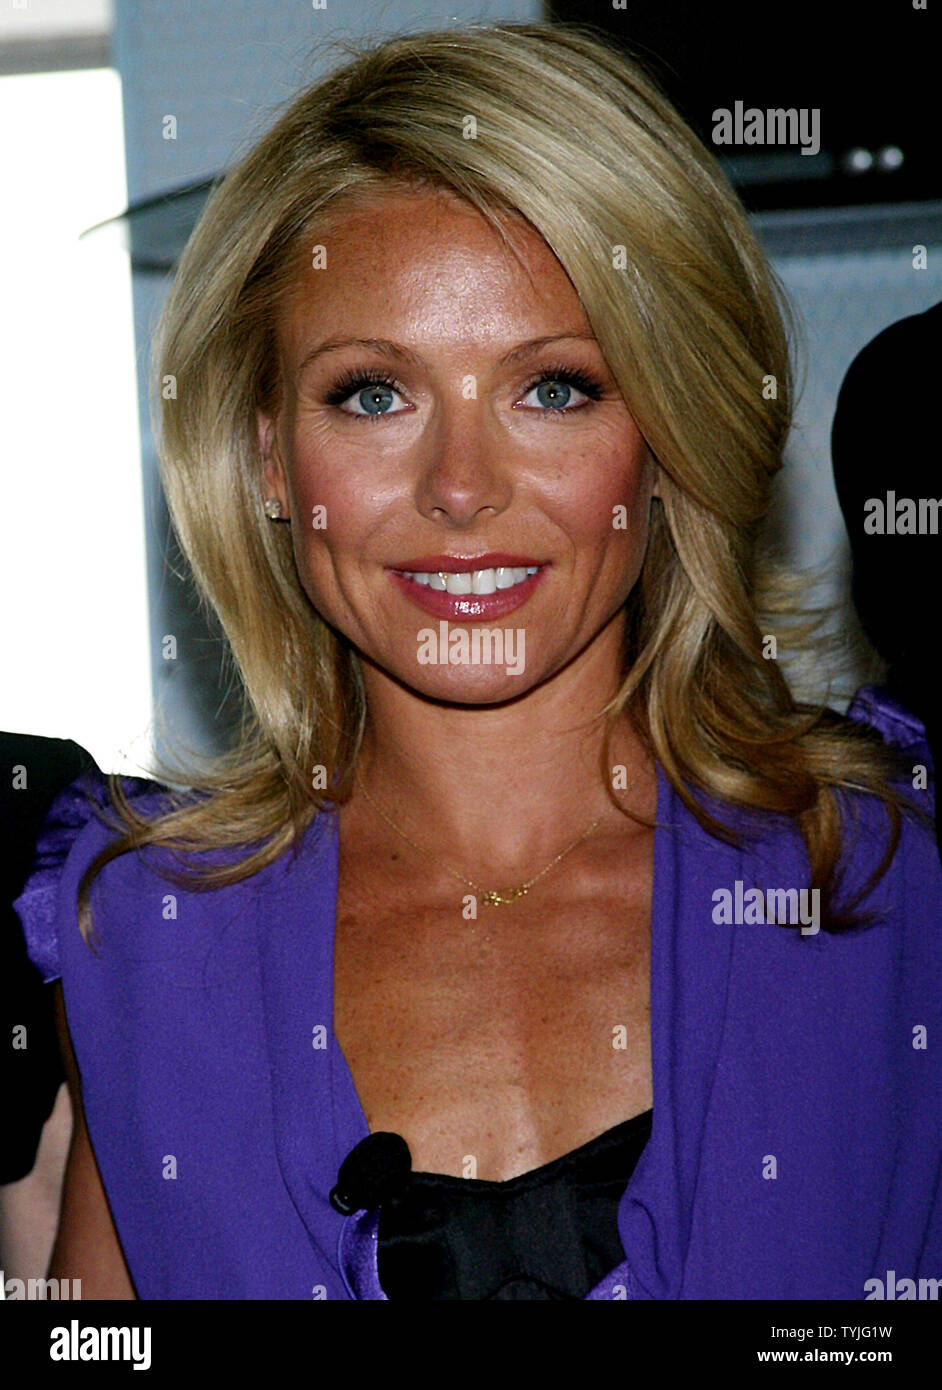 Kelly Ripa arrives at the press conference announcing the launch of the new Electrolux collection of premium kitchen appliances and their joint efforts to raise funds for ovarian cancer research at the Glass Houses in New York on April 3, 2008.   (UPI Photo/Laura Cavanaugh) Stock Photo